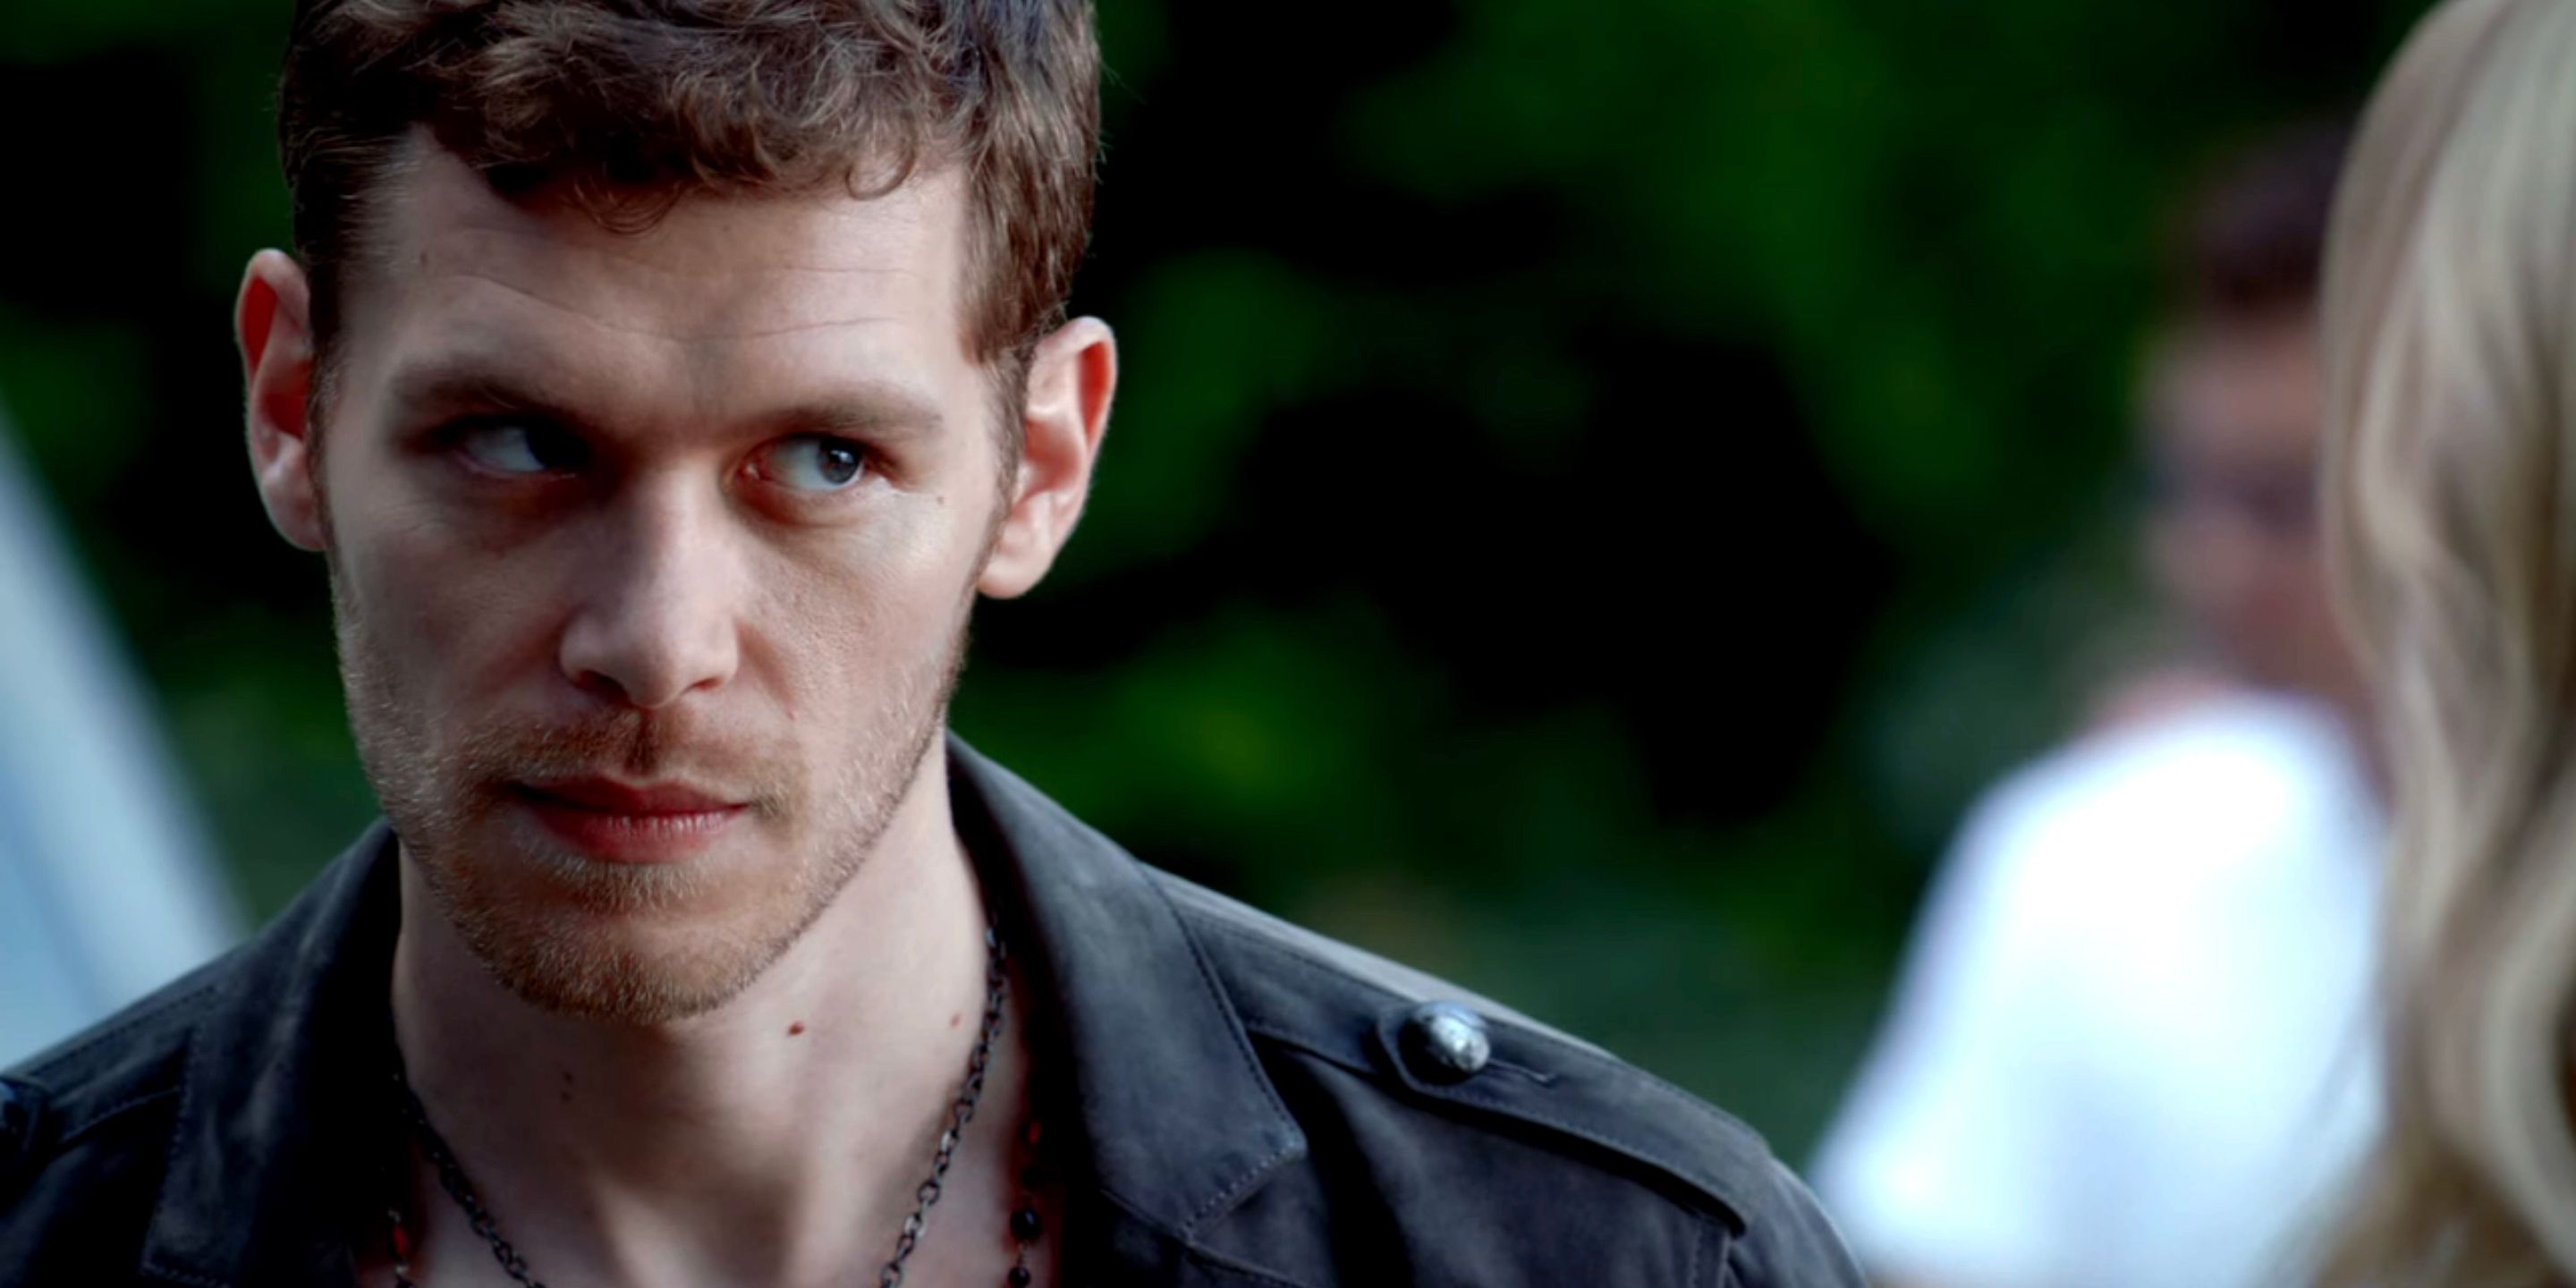 Klaus gives Caroline puppy eyes in The Vampire Diaries.